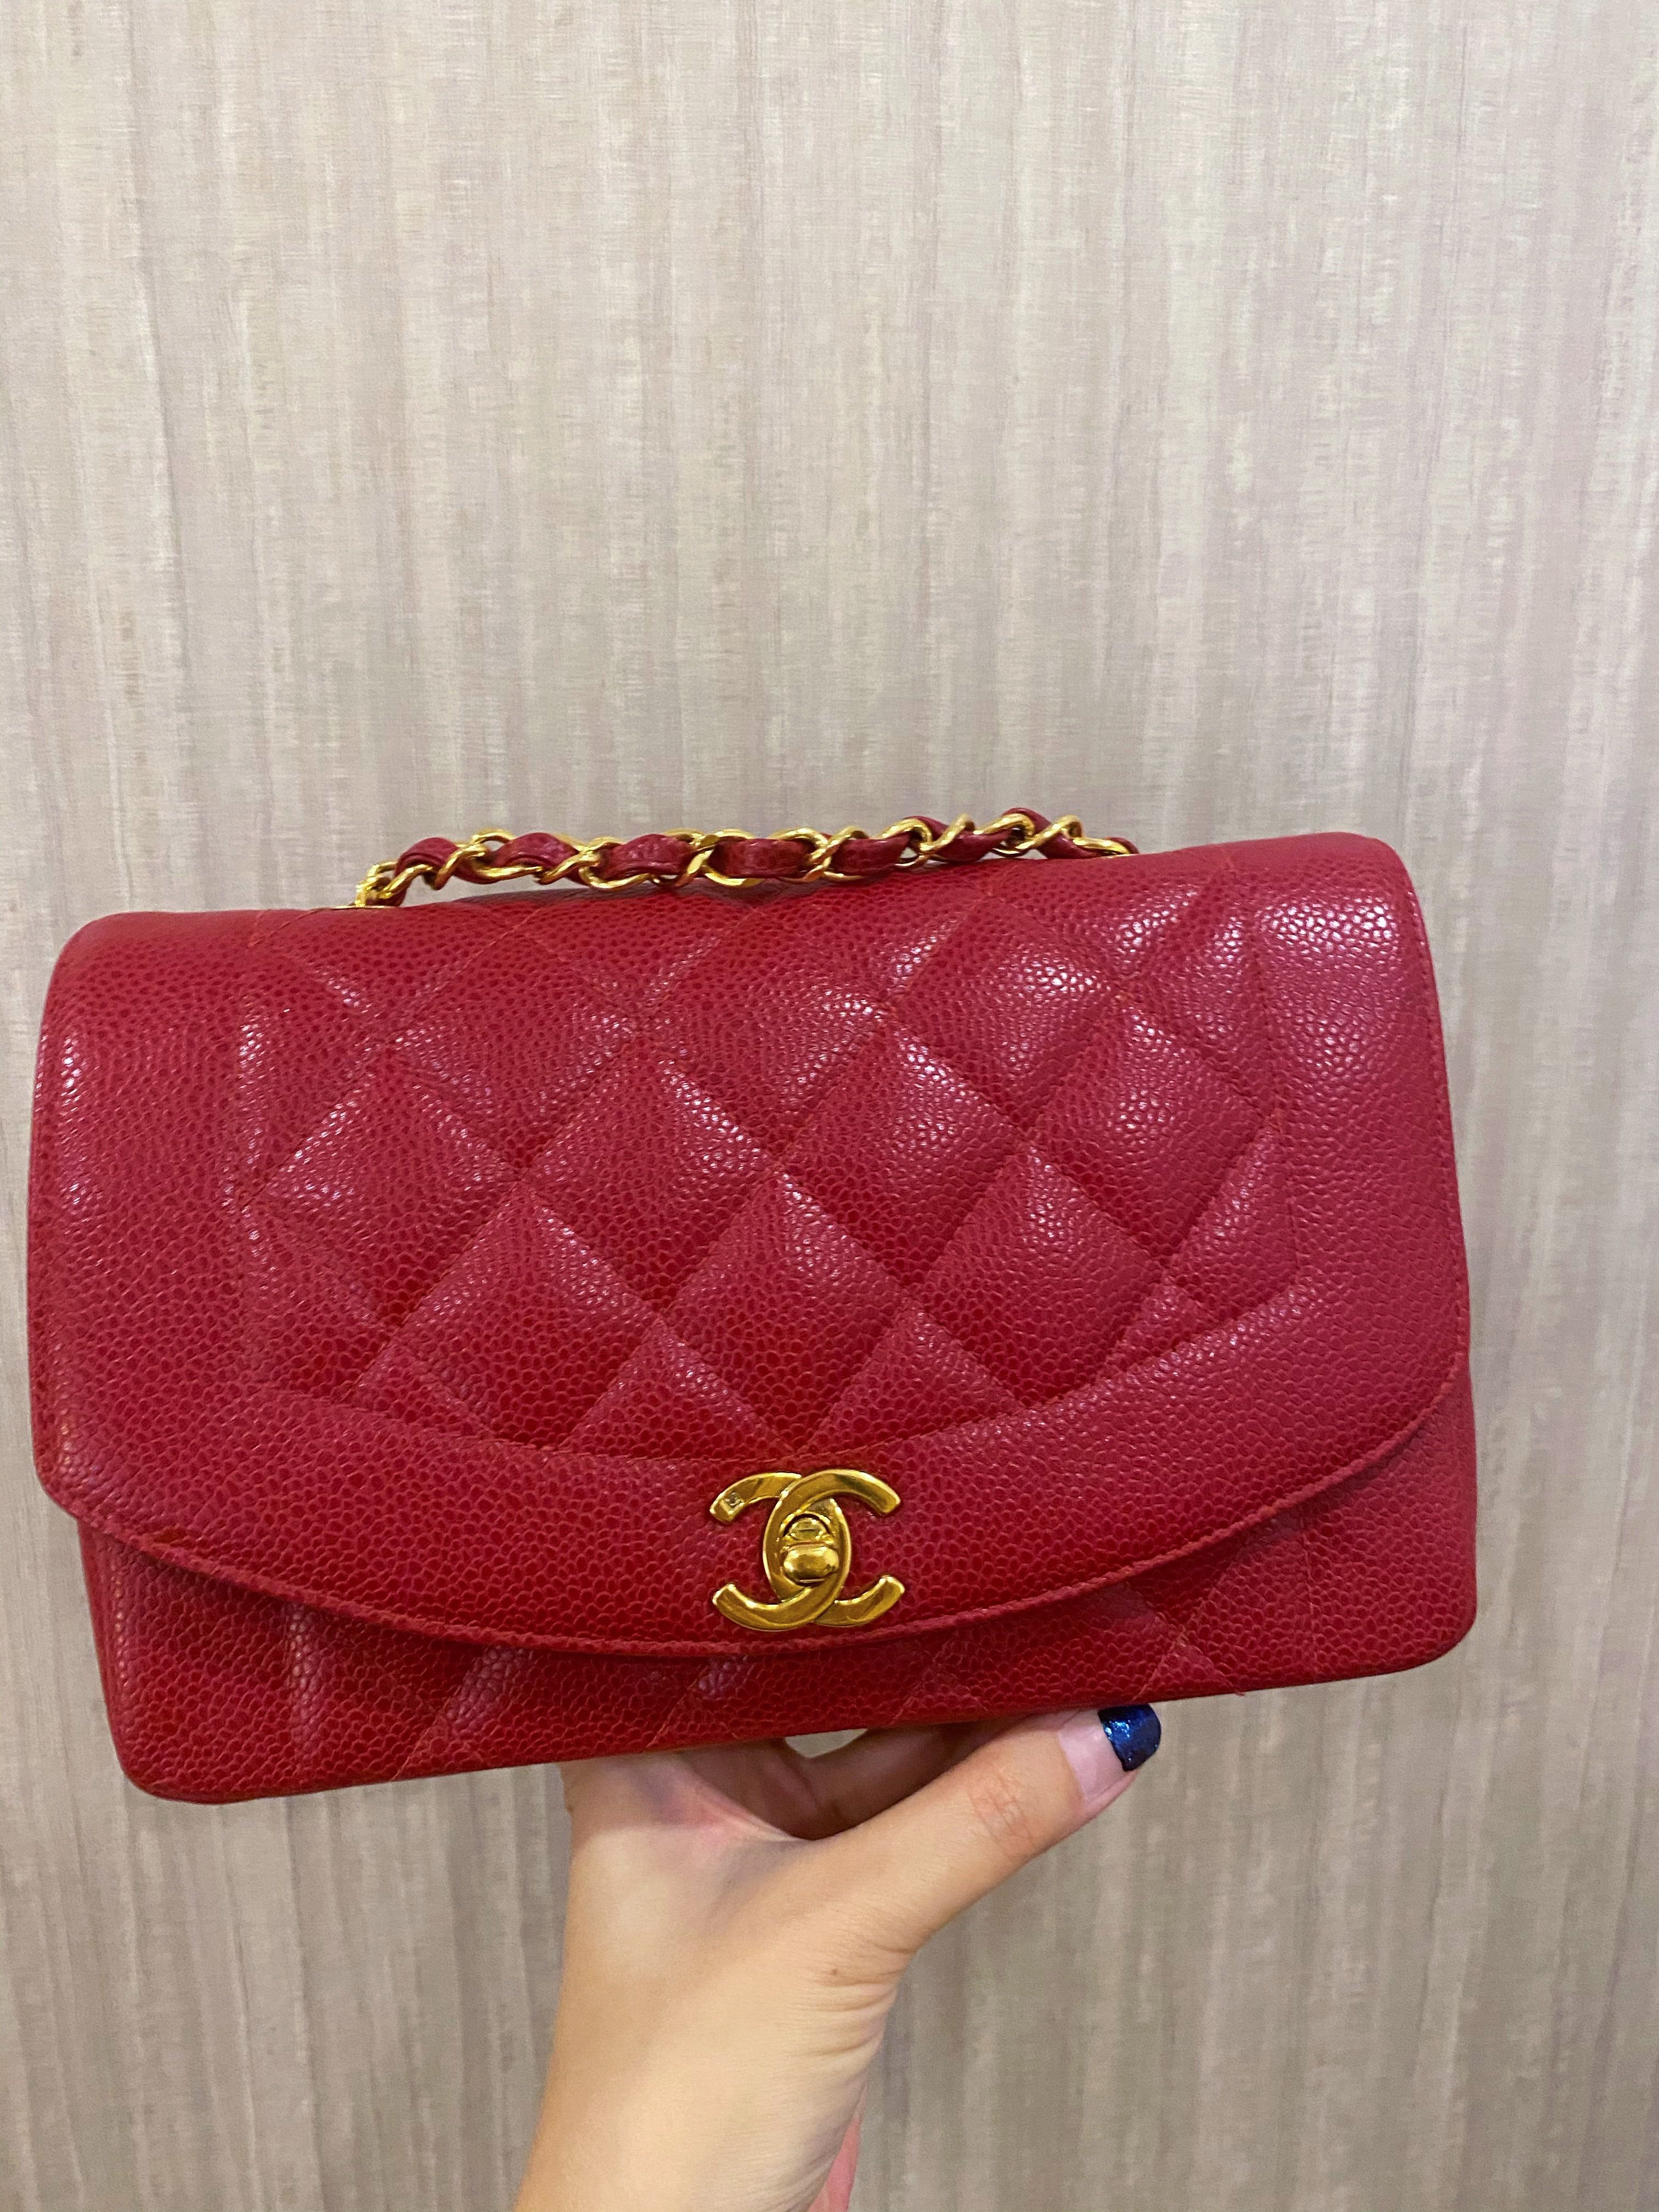 Chanel Vintage Red Caviar Small Diana Flap Bag 24K GHW